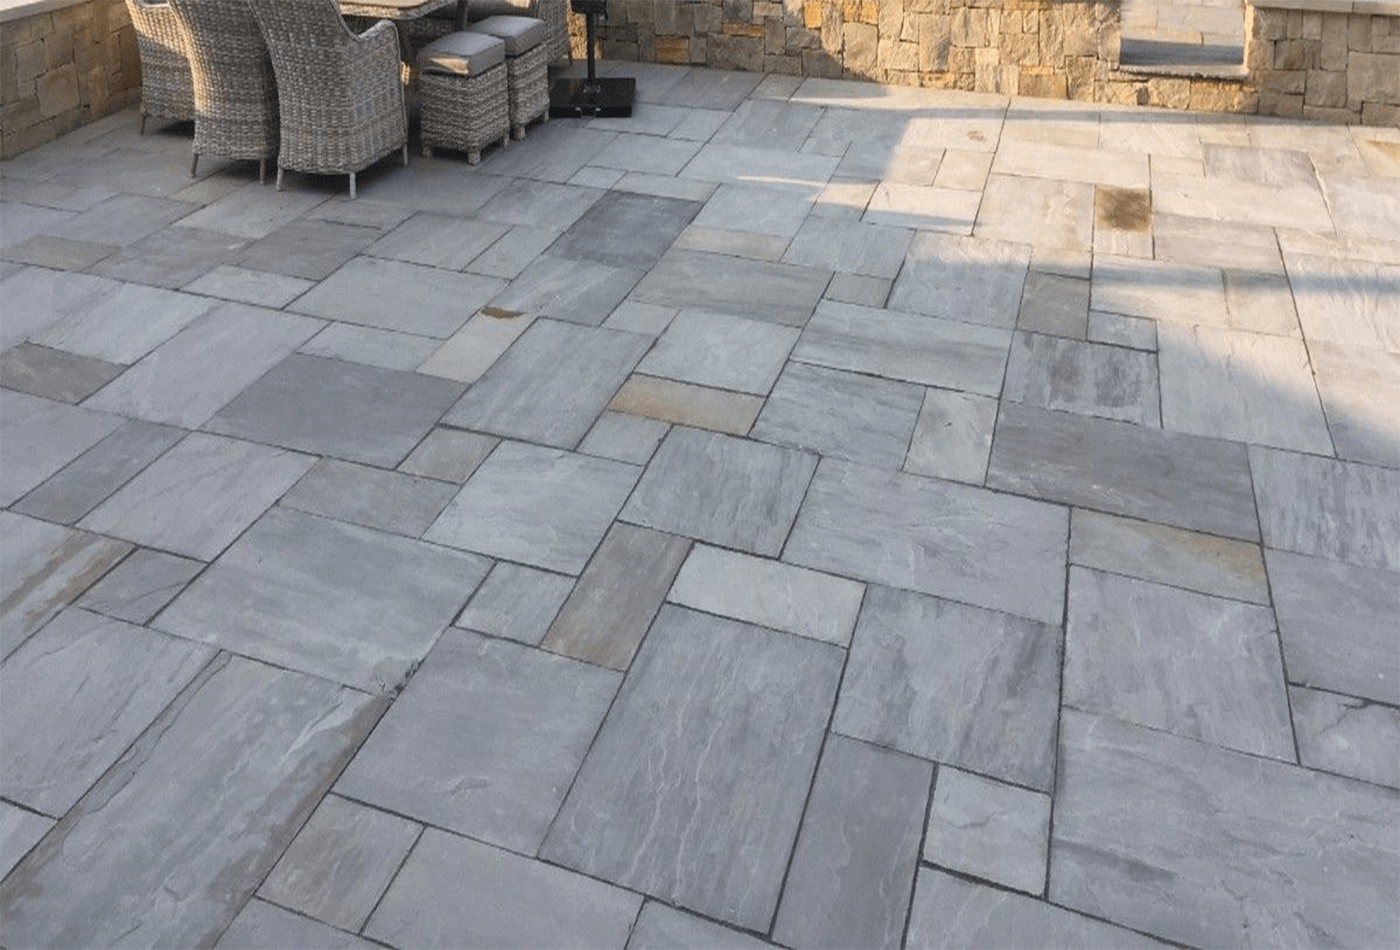 Outdoor Patio Materials With These Beautiful Grey Sandstone